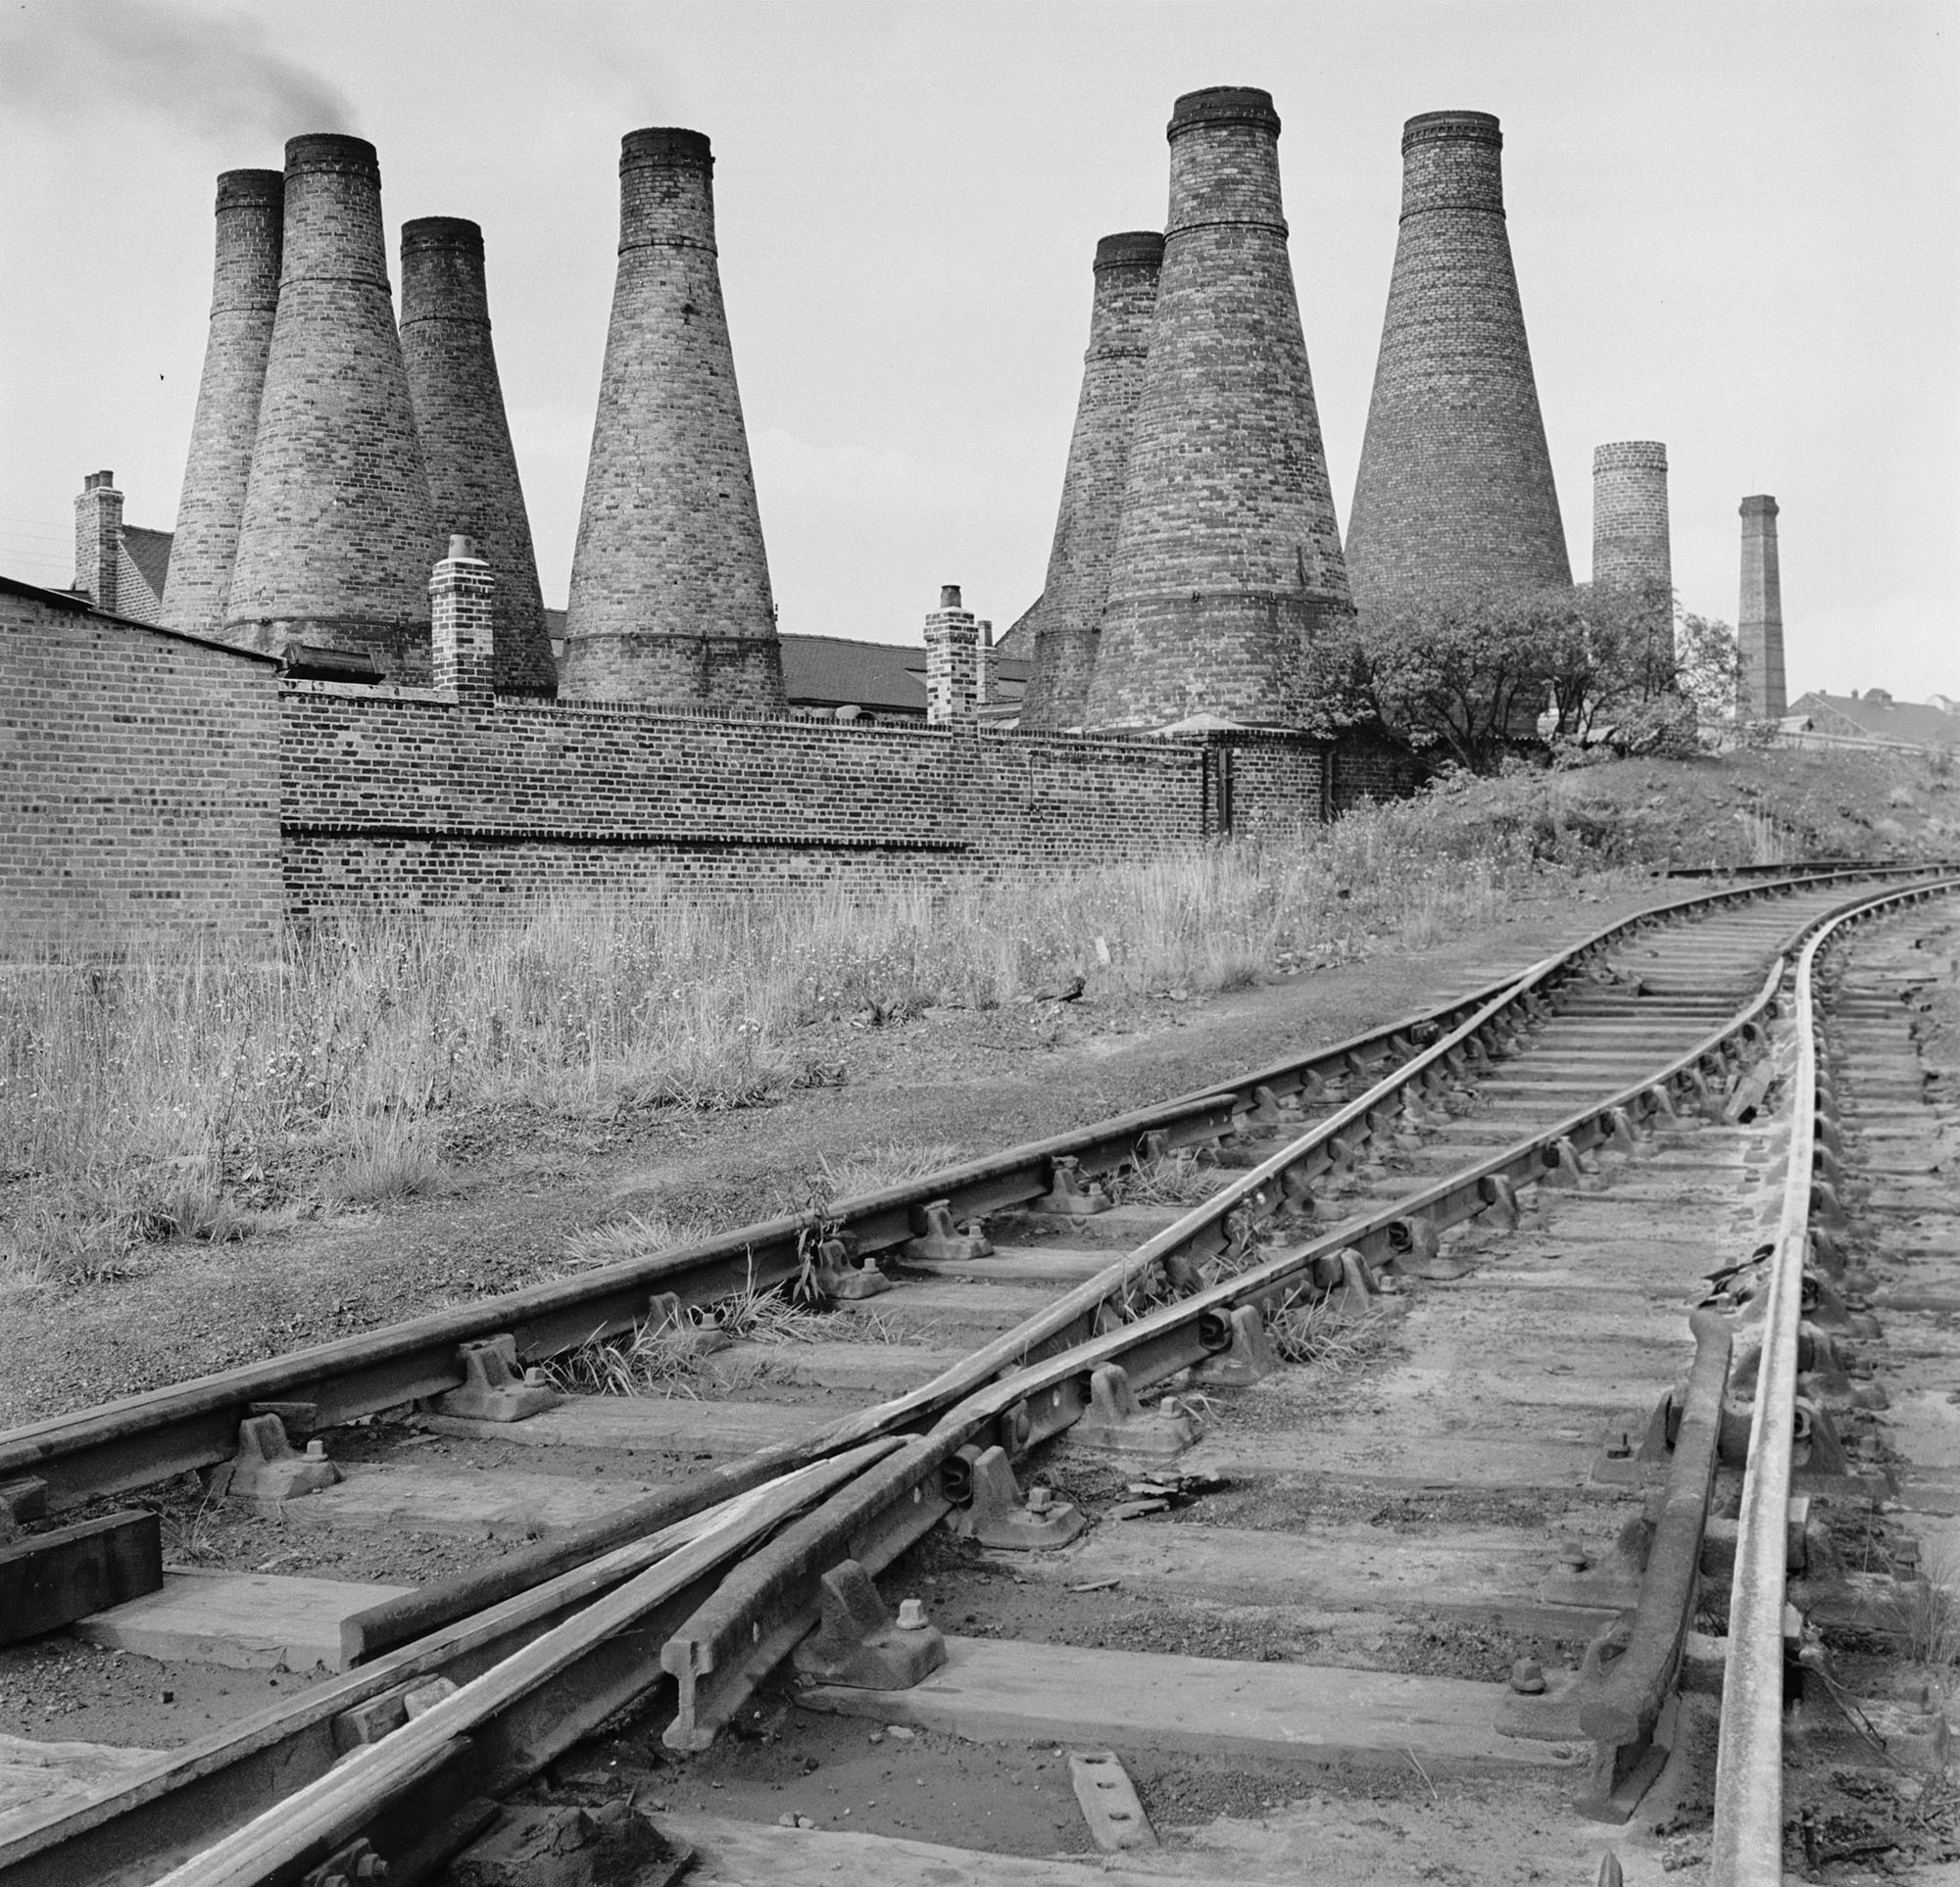 Black and white photo shows railway tracks in front of kiln chimneys